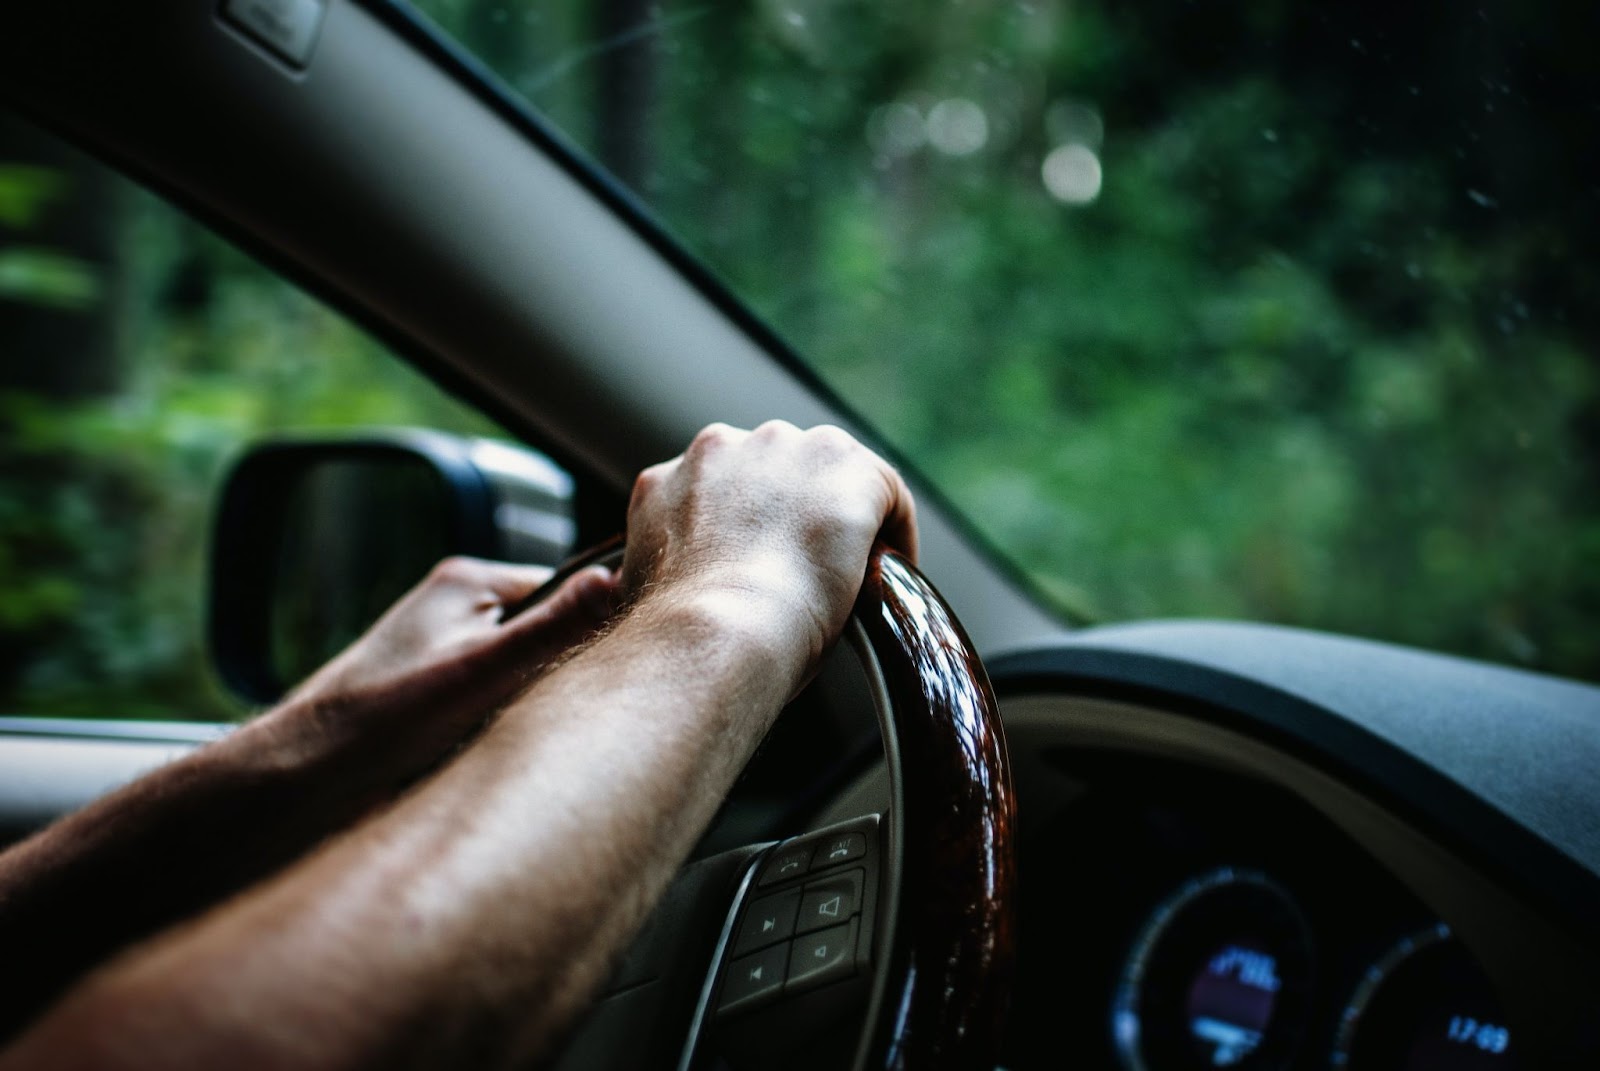 FAQs About Keeping Your Car Safe and Well-Maintained